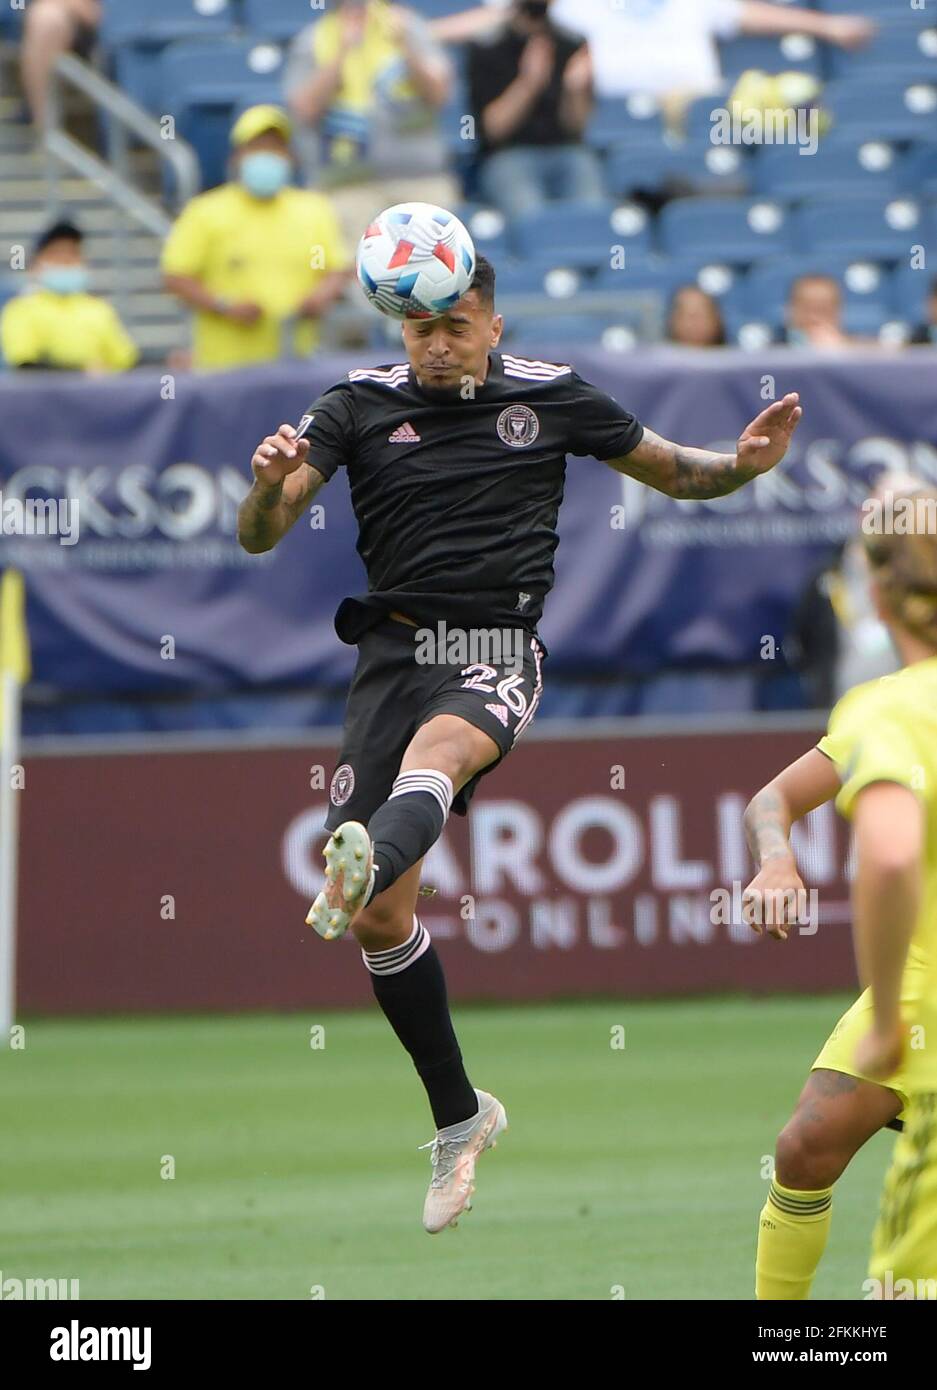 May 2, 2021: Inter Miami CF midfielder Gregore (26) heads the ball against the Nashville SC during the first half of an MLS game between the Inter Miami CF and the Nashville SC at Nissan Stadium in Nashville TN (Mandatory Photo Credit: Steve Roberts/CSM) Stock Photo